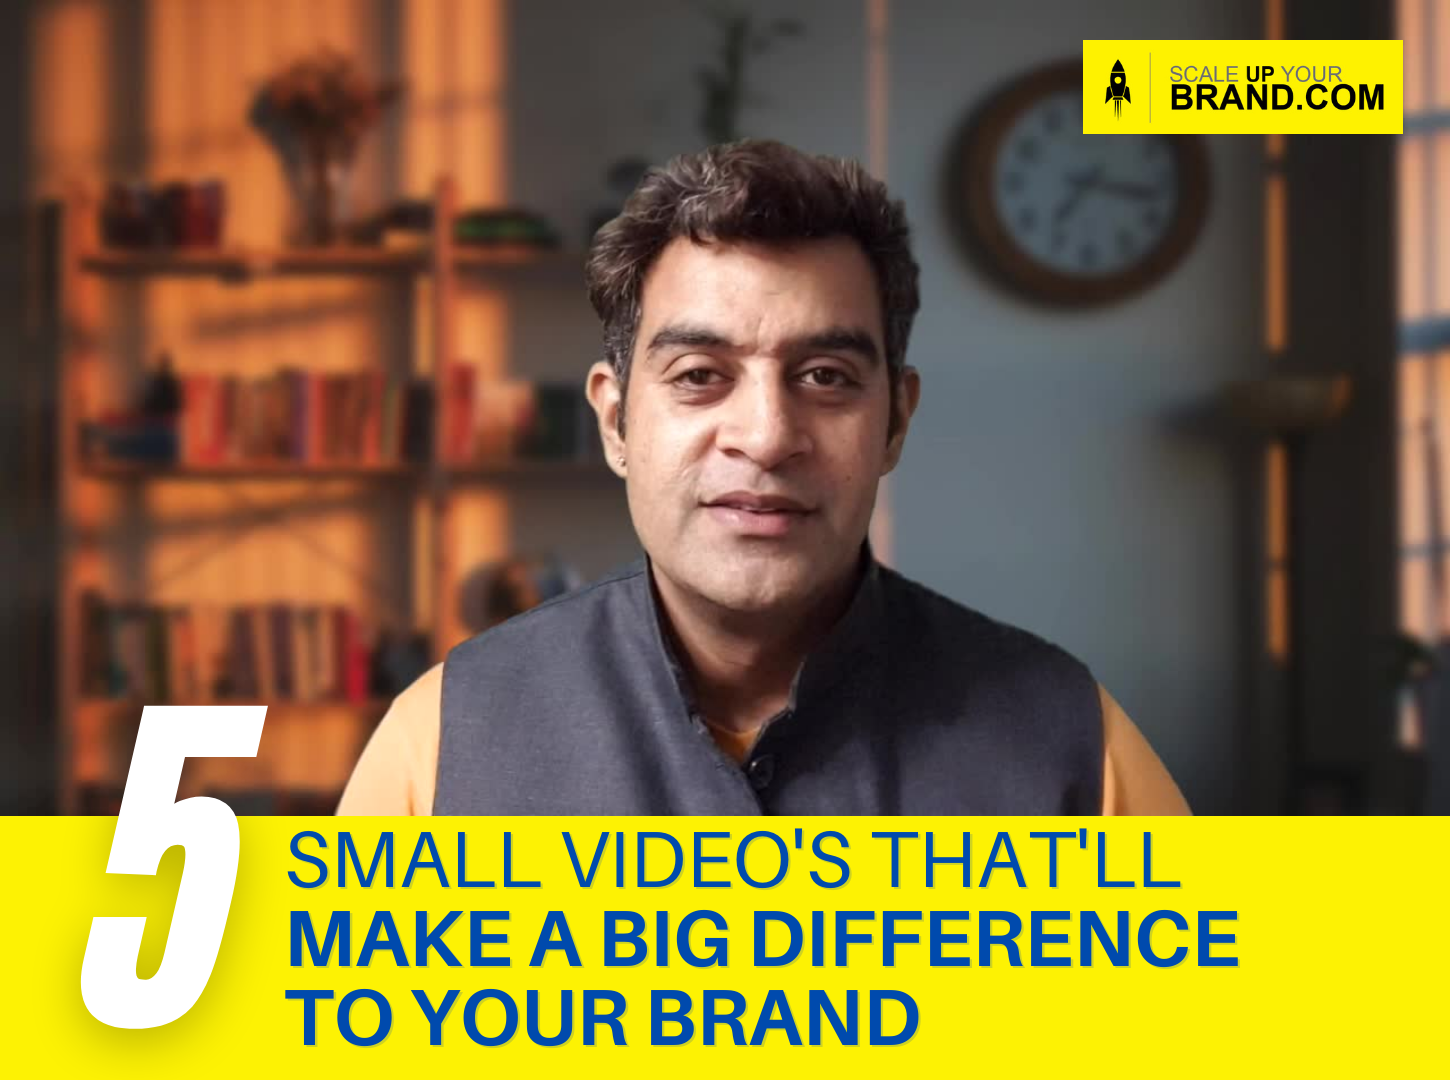 5 Small Video’s That’s Make a Big Difference To Your Brand